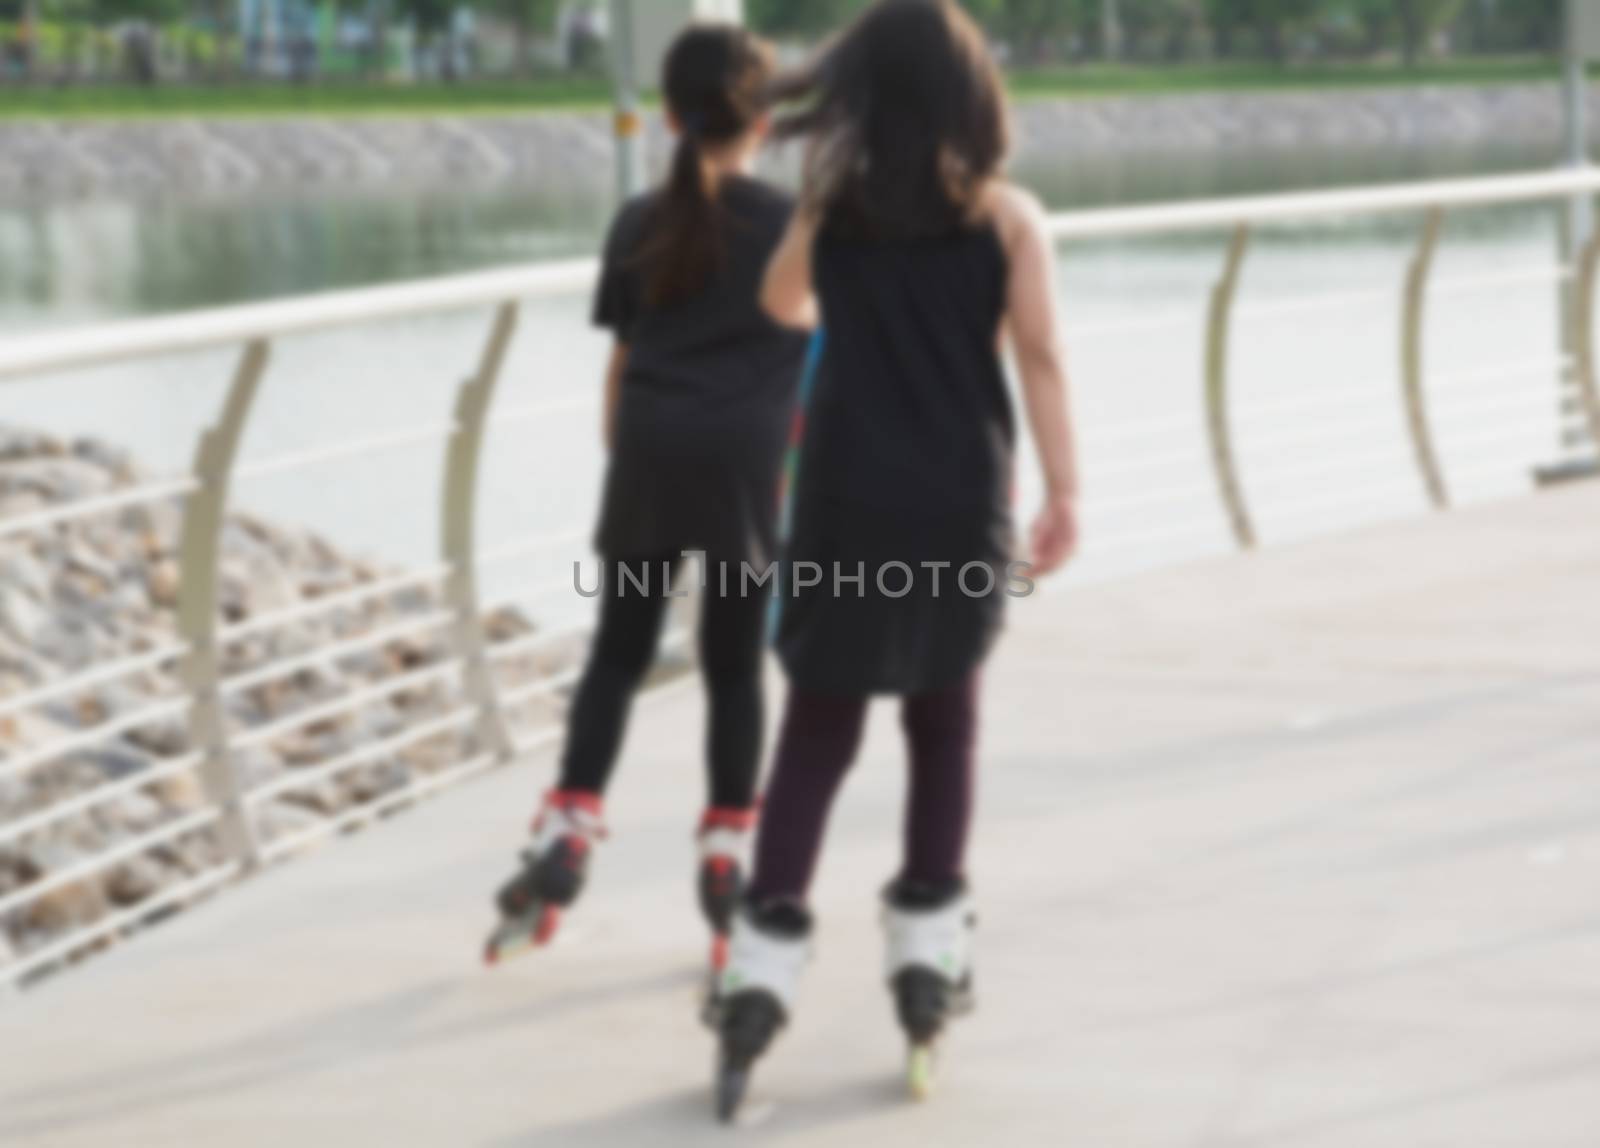 Blurred young people playing roller skates outdoor in park. Teenage girls on roller skates at outdoor.